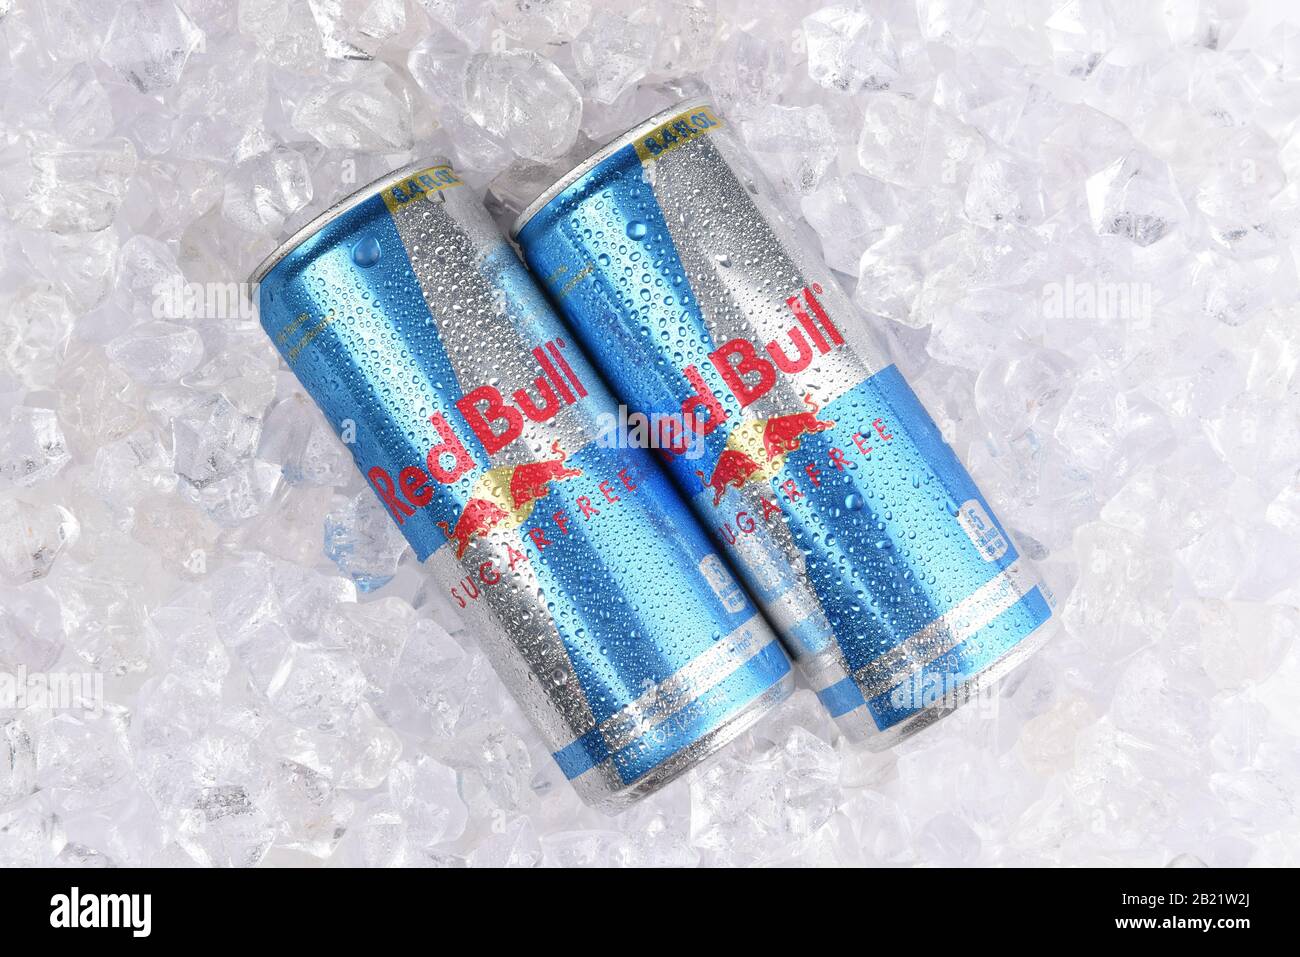 IRVINE, CALIFORNIA - AUGUST 19, 2019: Two Red Bull Sugar Free Energy Drink cans in ice. Stock Photo